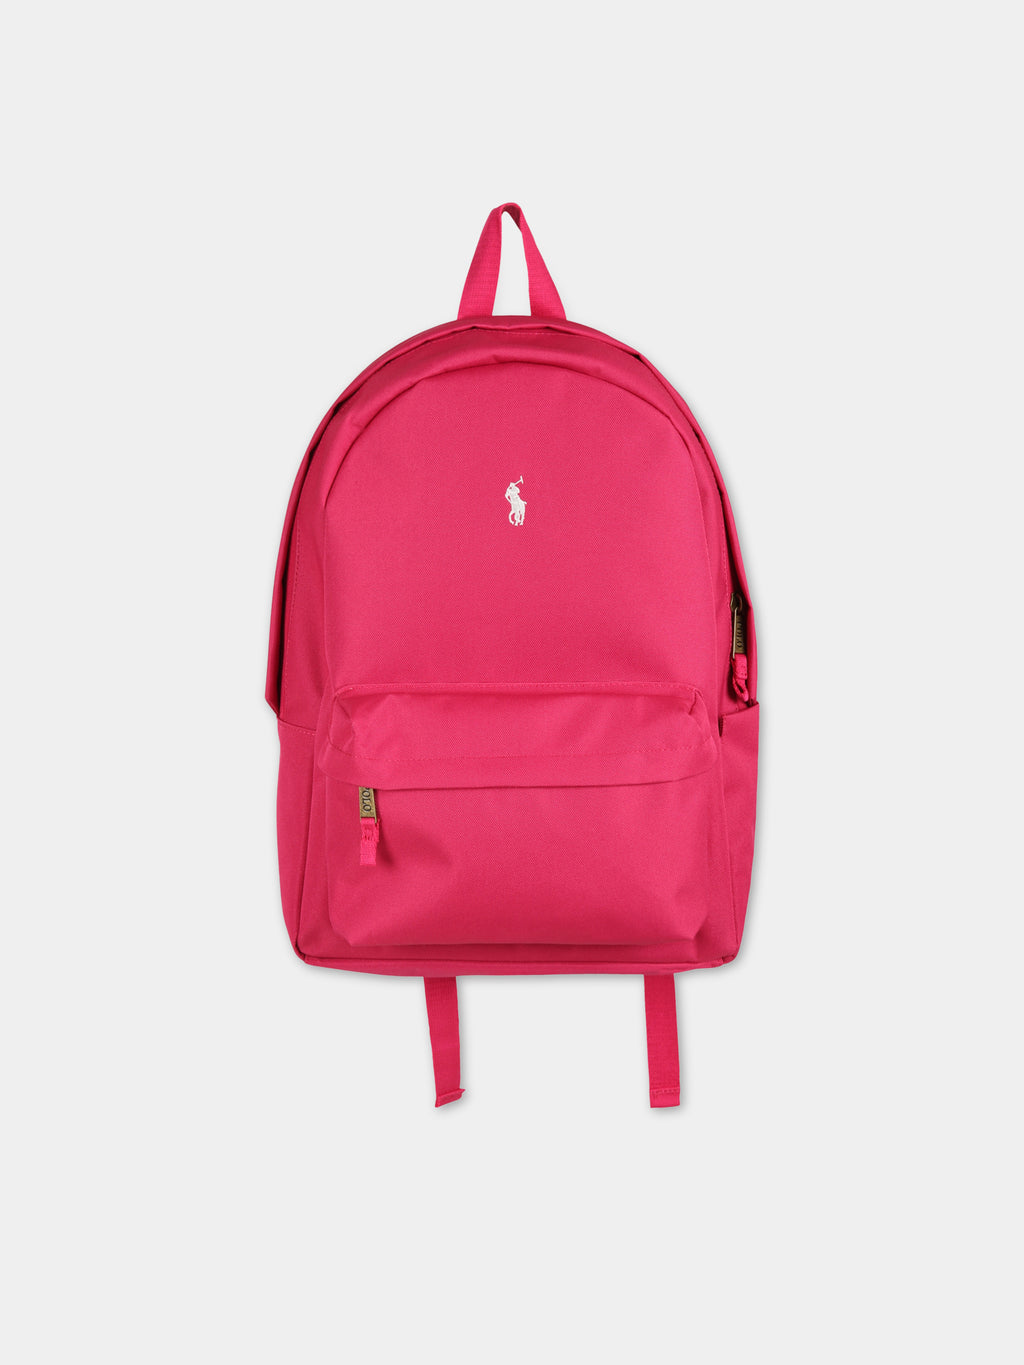 Fuchsia backpack for girl with iconic pony logo